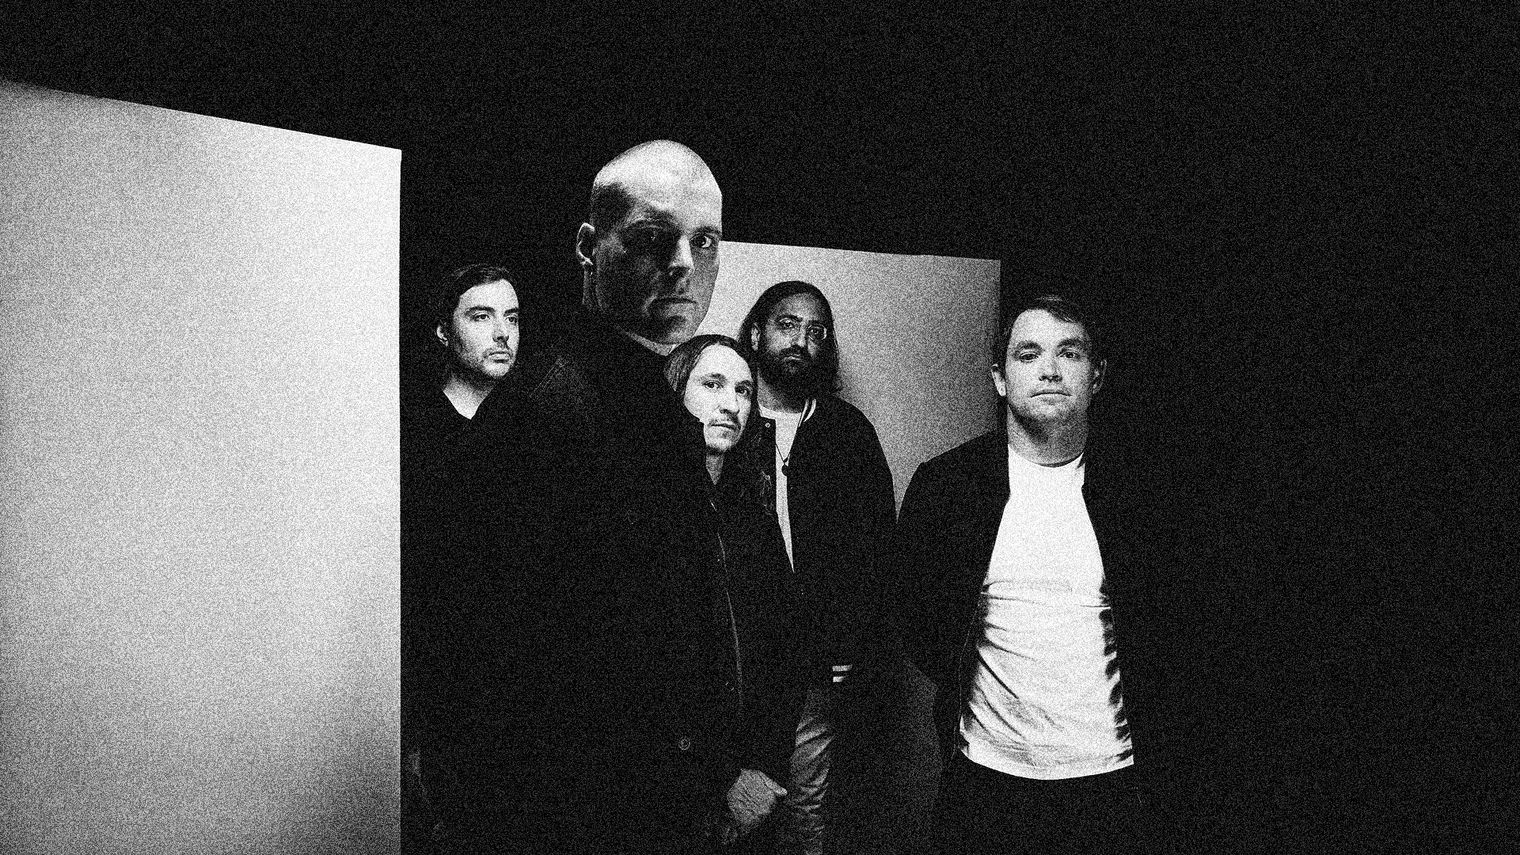 Greyscale image of the members of Deafheaven, standing together looking towards the camera.